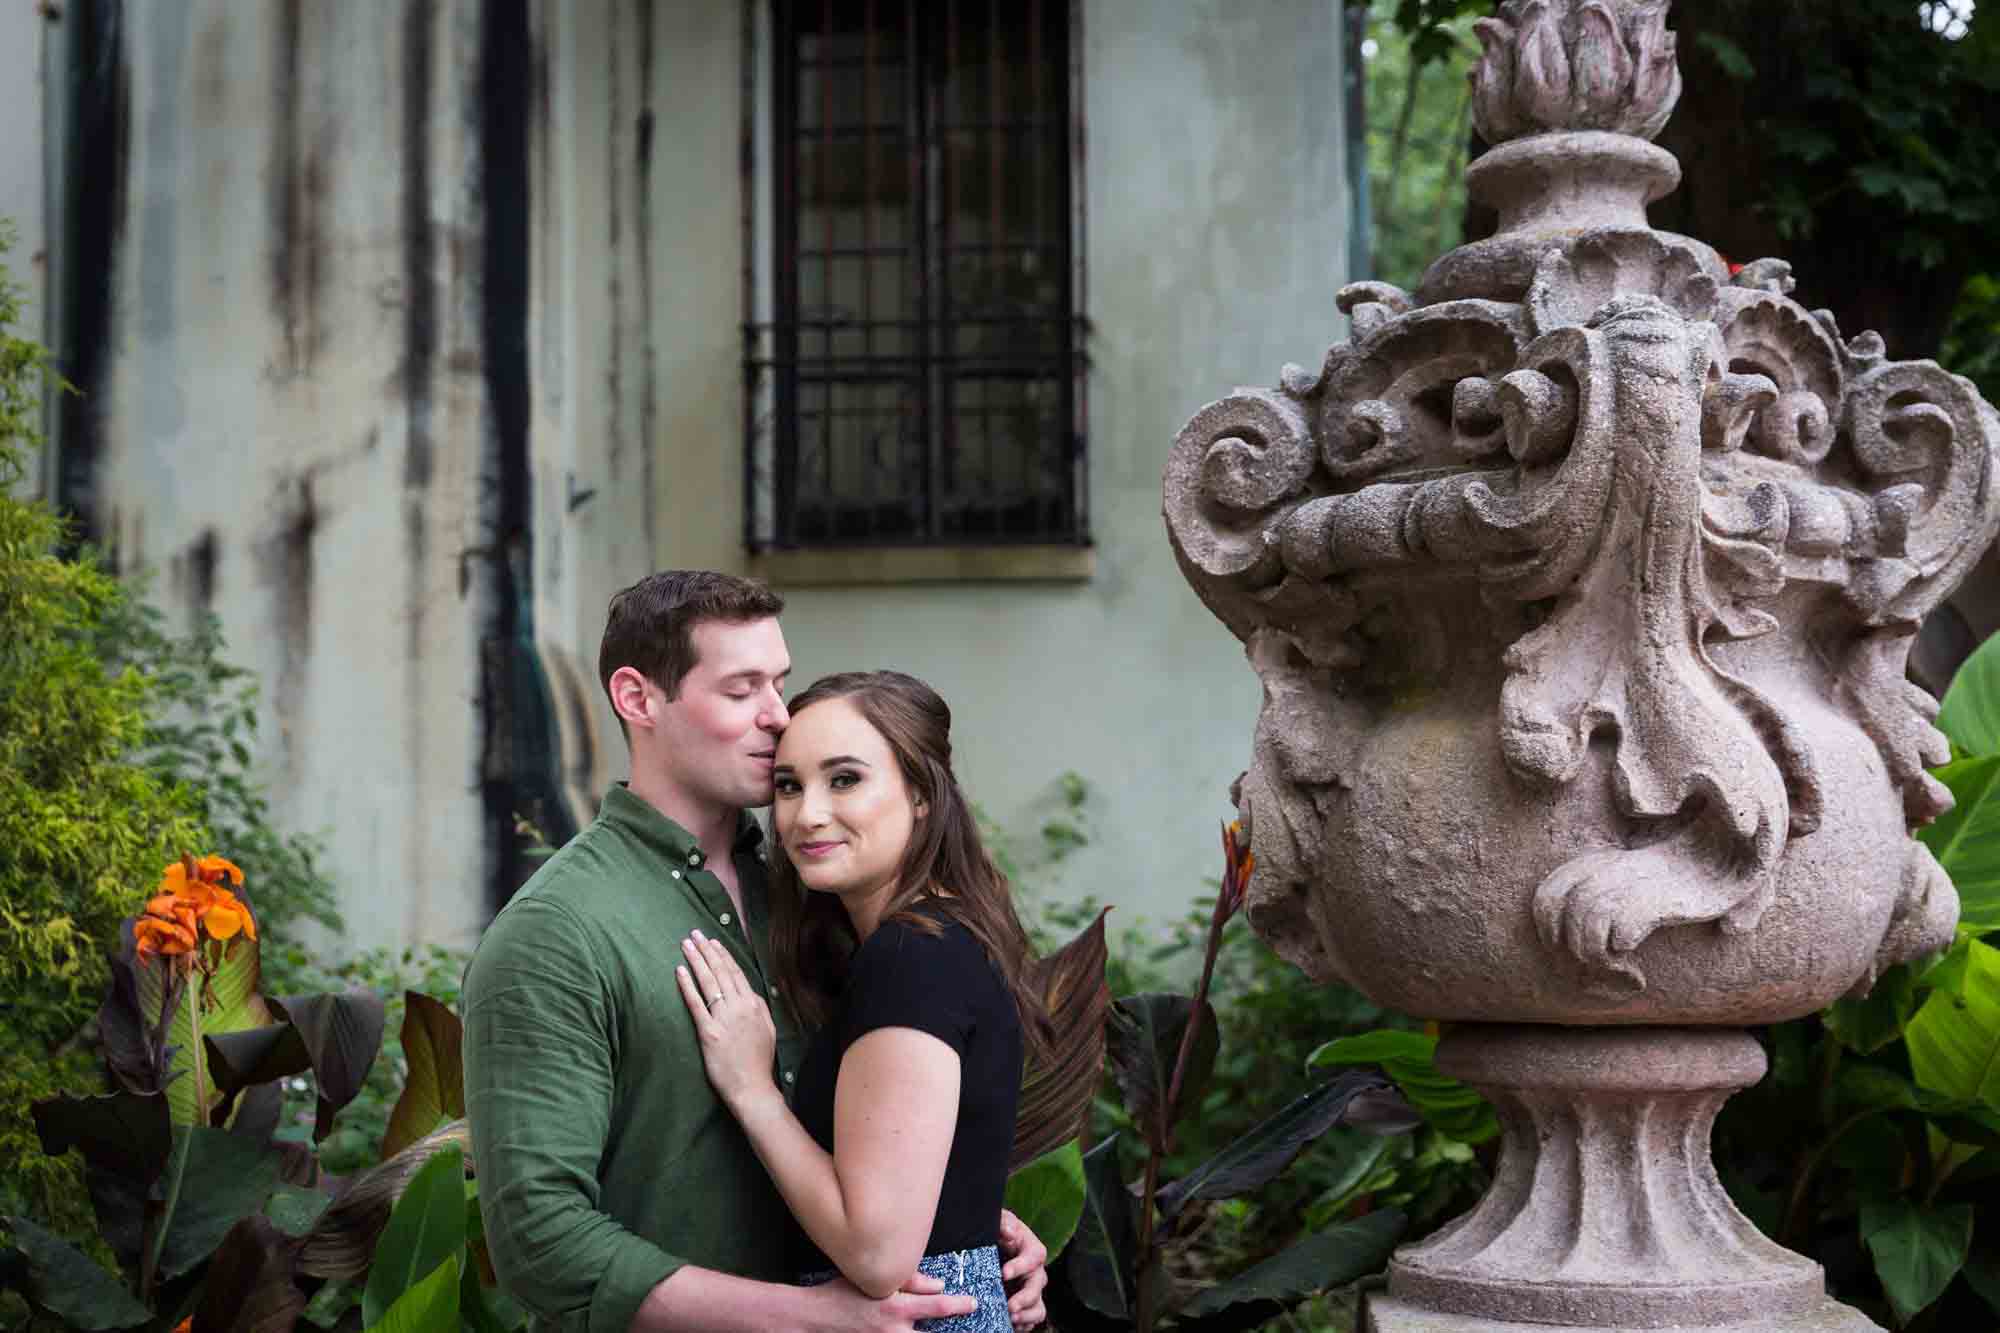 Vanderbilt Museum engagement photos of man kissing woman on side of head with stone urn